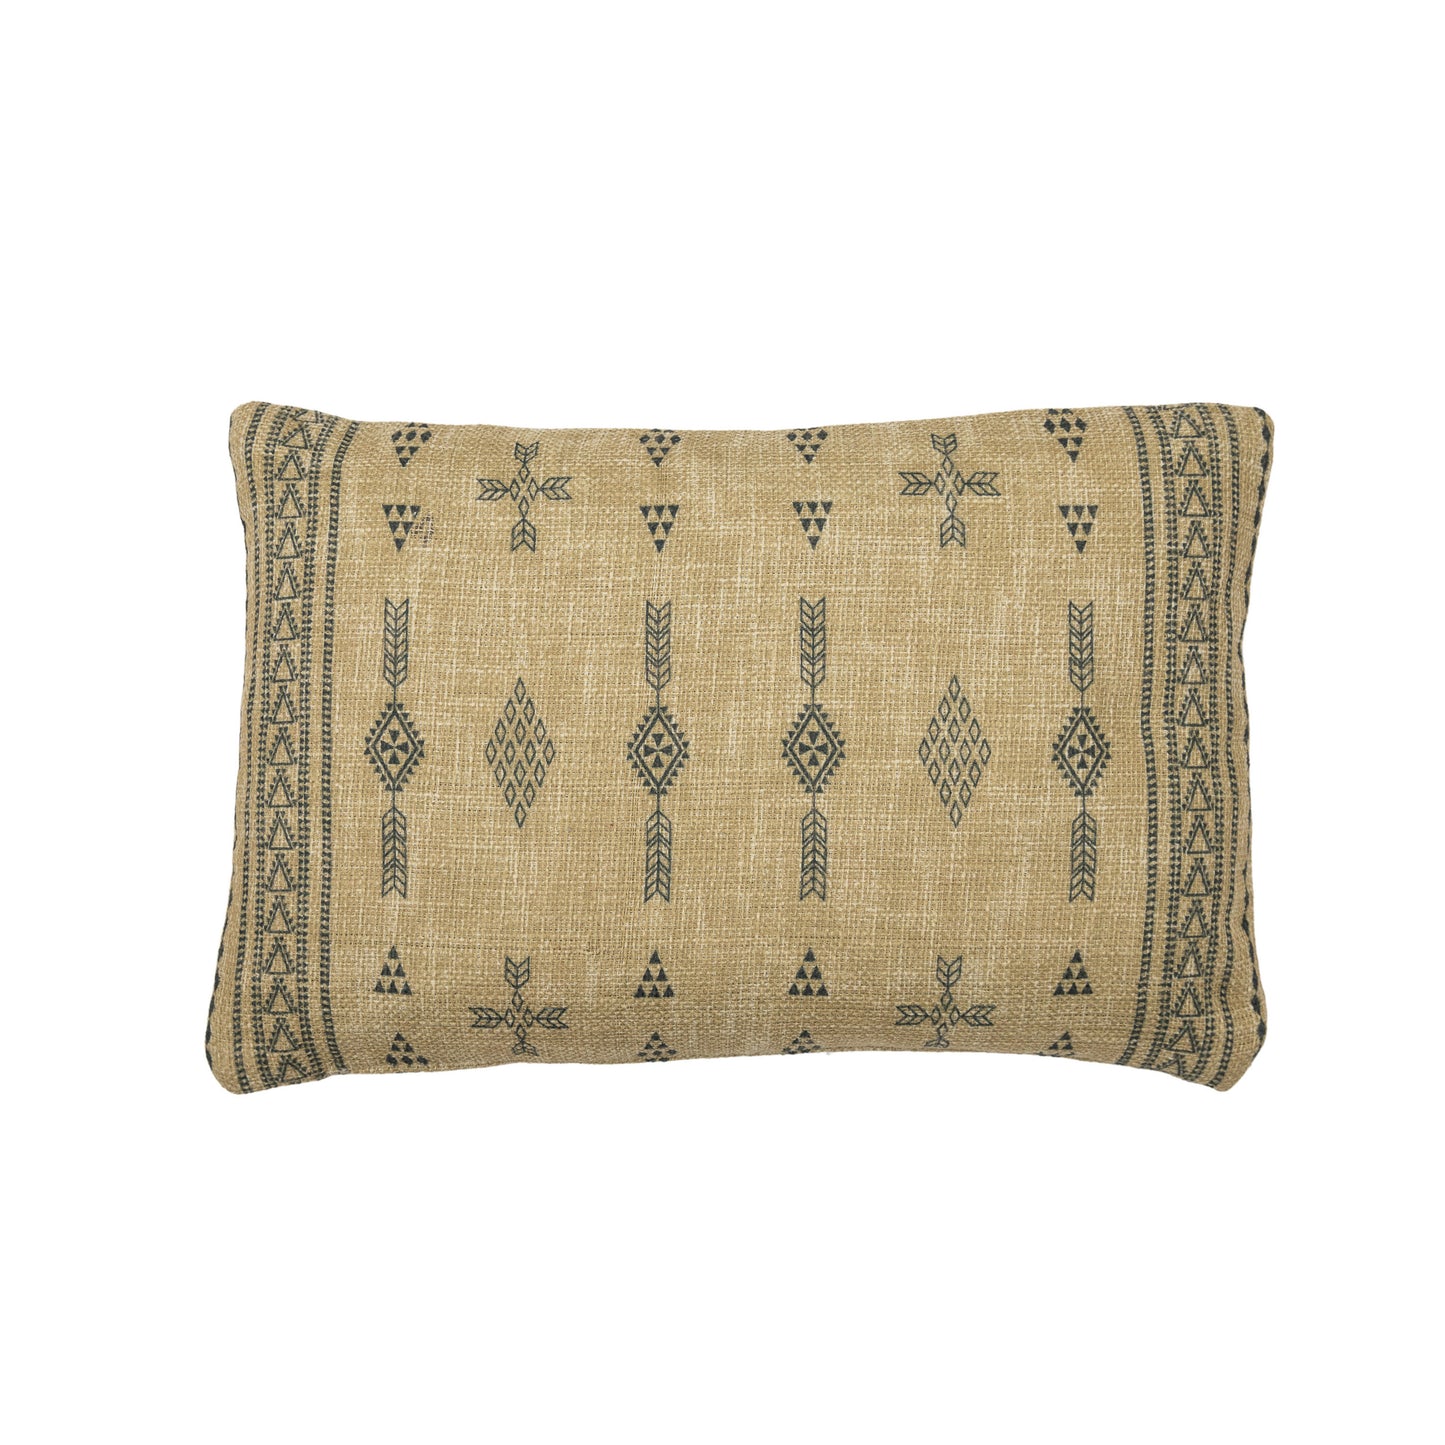 A geometric patterned cushion from Kikiathome.co.uk, perfect for interior decor.